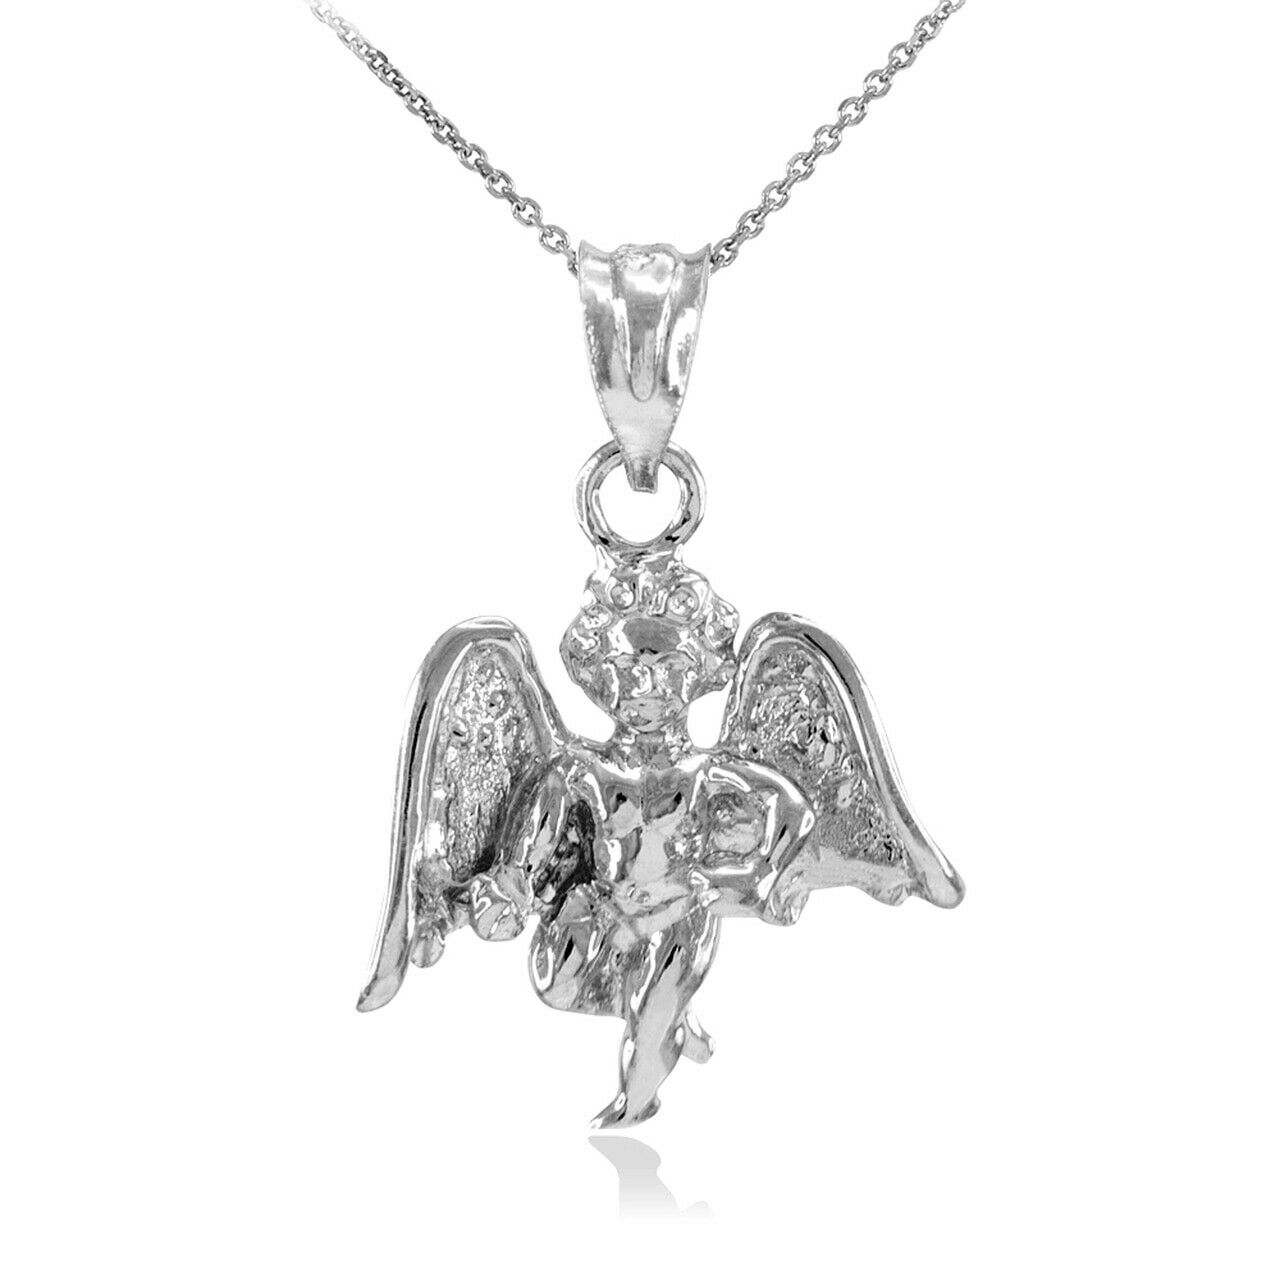 14k Solid White Gold Guardian Angel Charm Pendant Necklace